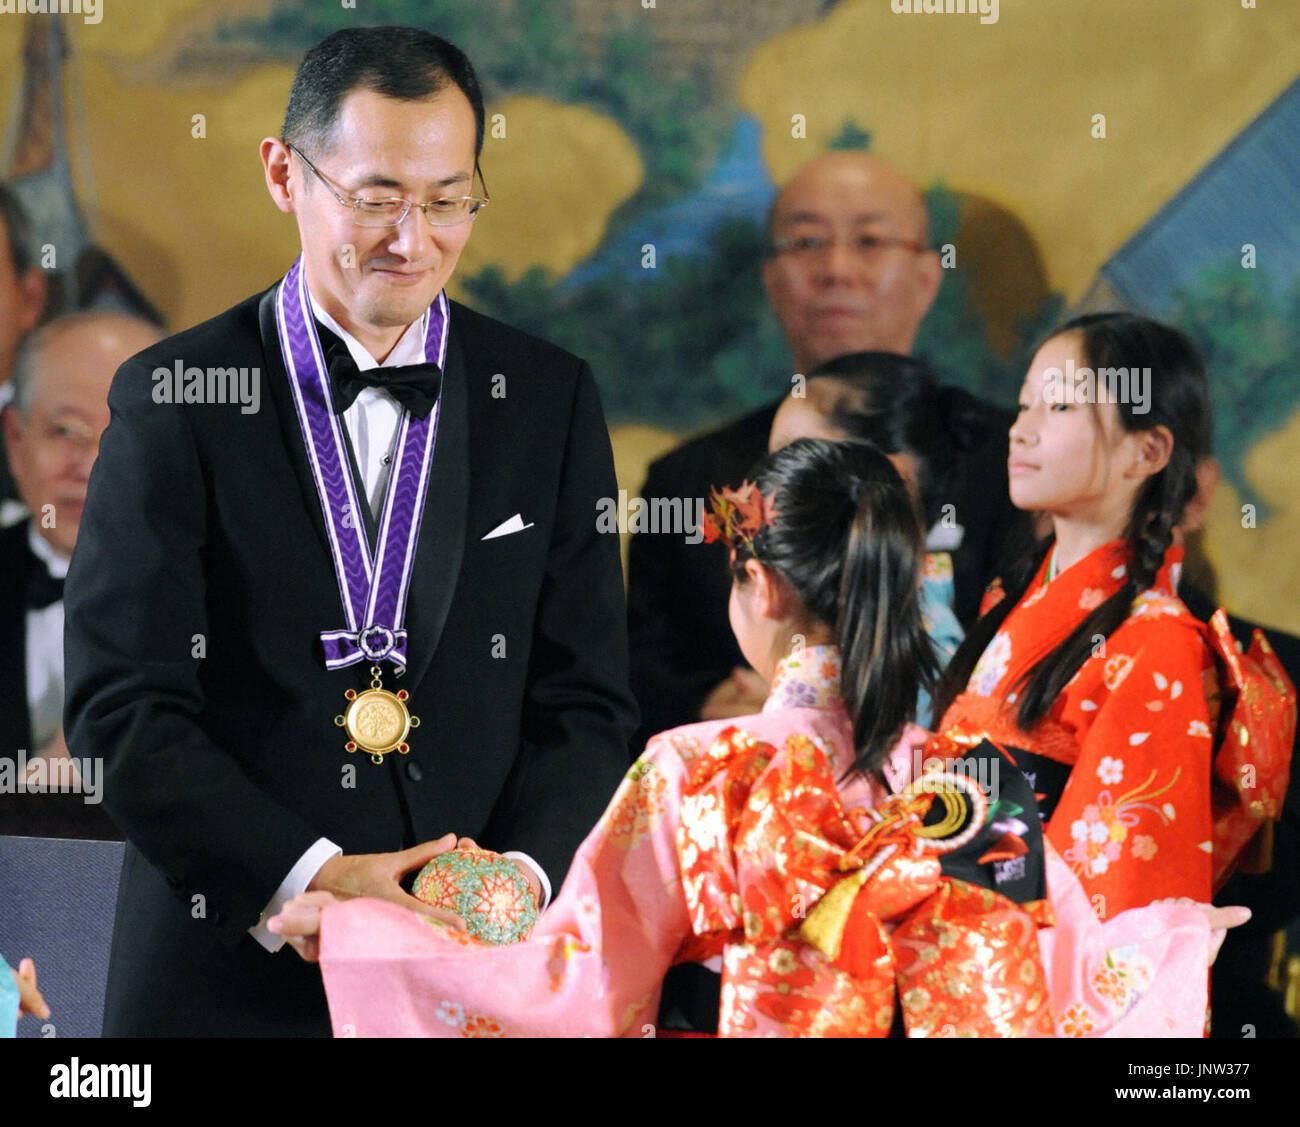 KYOTO, Japan - Shinya Yamanaka, a Kyoto University professor known for developing technologies to generate induced pluripotent stem cells, or iPS cells, receives a thread ball as a memento at the award ceremony in Kyoto on Nov. 10, 2010, for the 2010 Kyoto Prize, an international prize presented by the Inamori Foundation. Yamanaka was recognized for his contributions in the field of biotechnology and medical technology. (Kyodo) Stock Photo